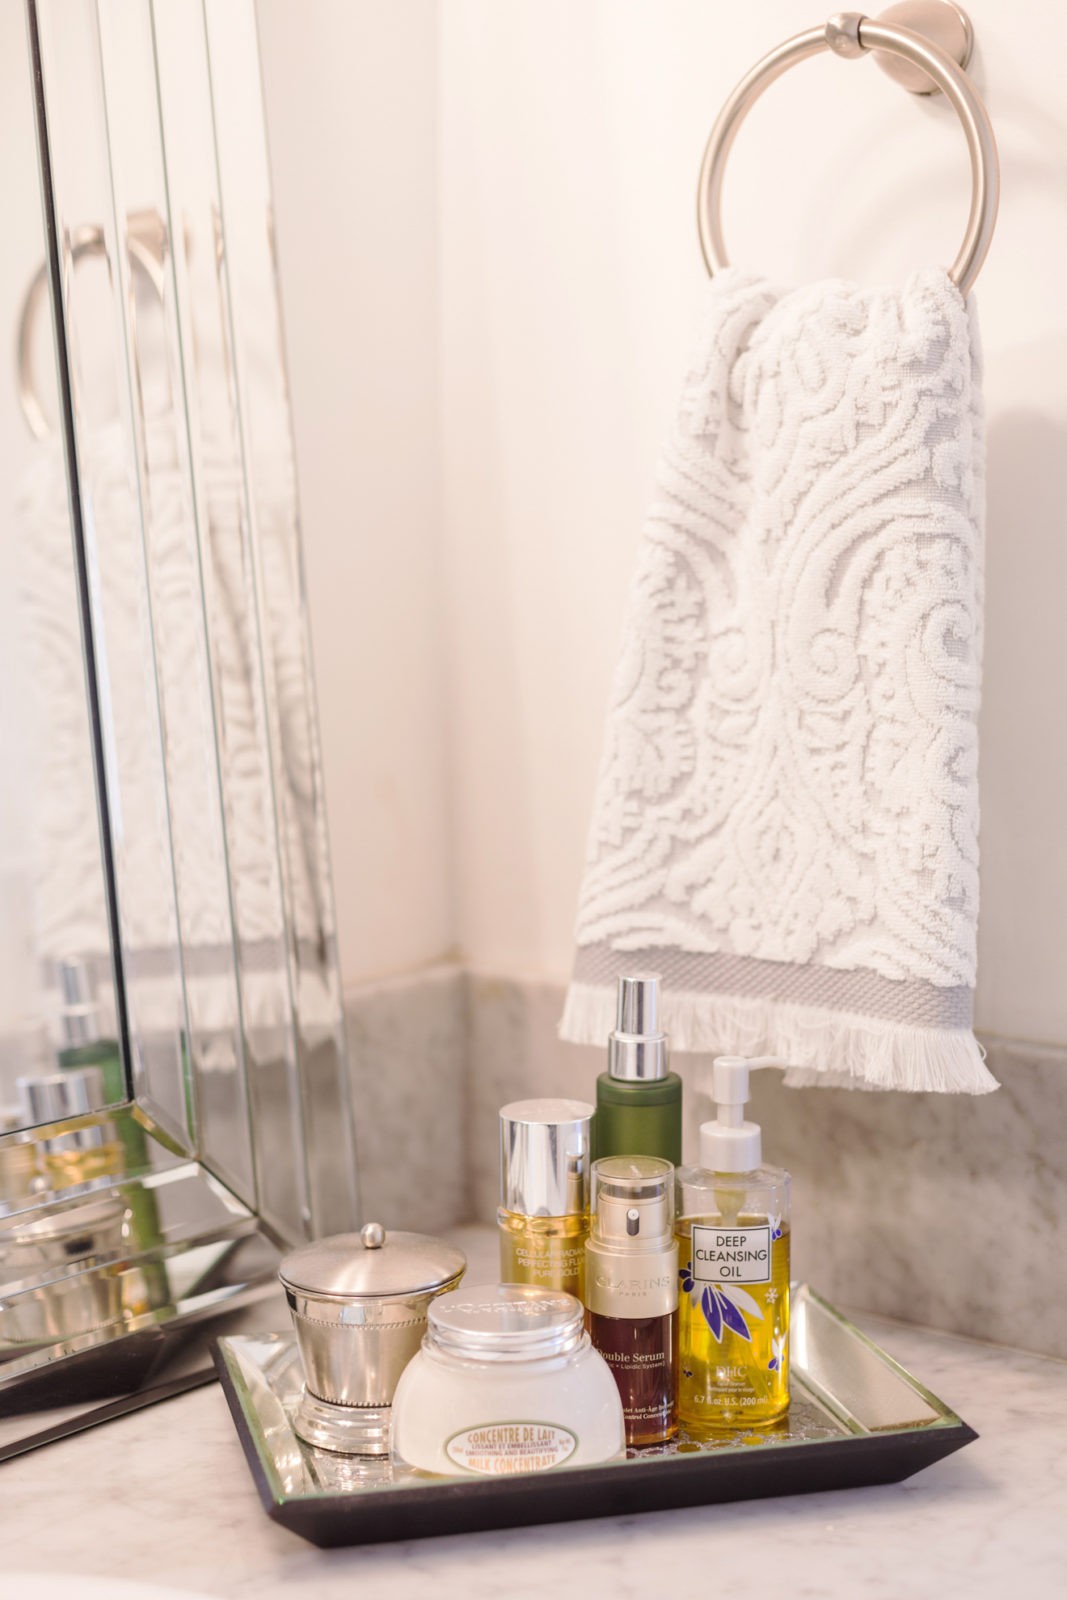 Modern Bathroom Remodel Ideas + Reveal featured by popular US lifestyle blogger, Laura Lily: image of grey damask hand towel and mirrored tray holding body spray, lotion, and face cream.